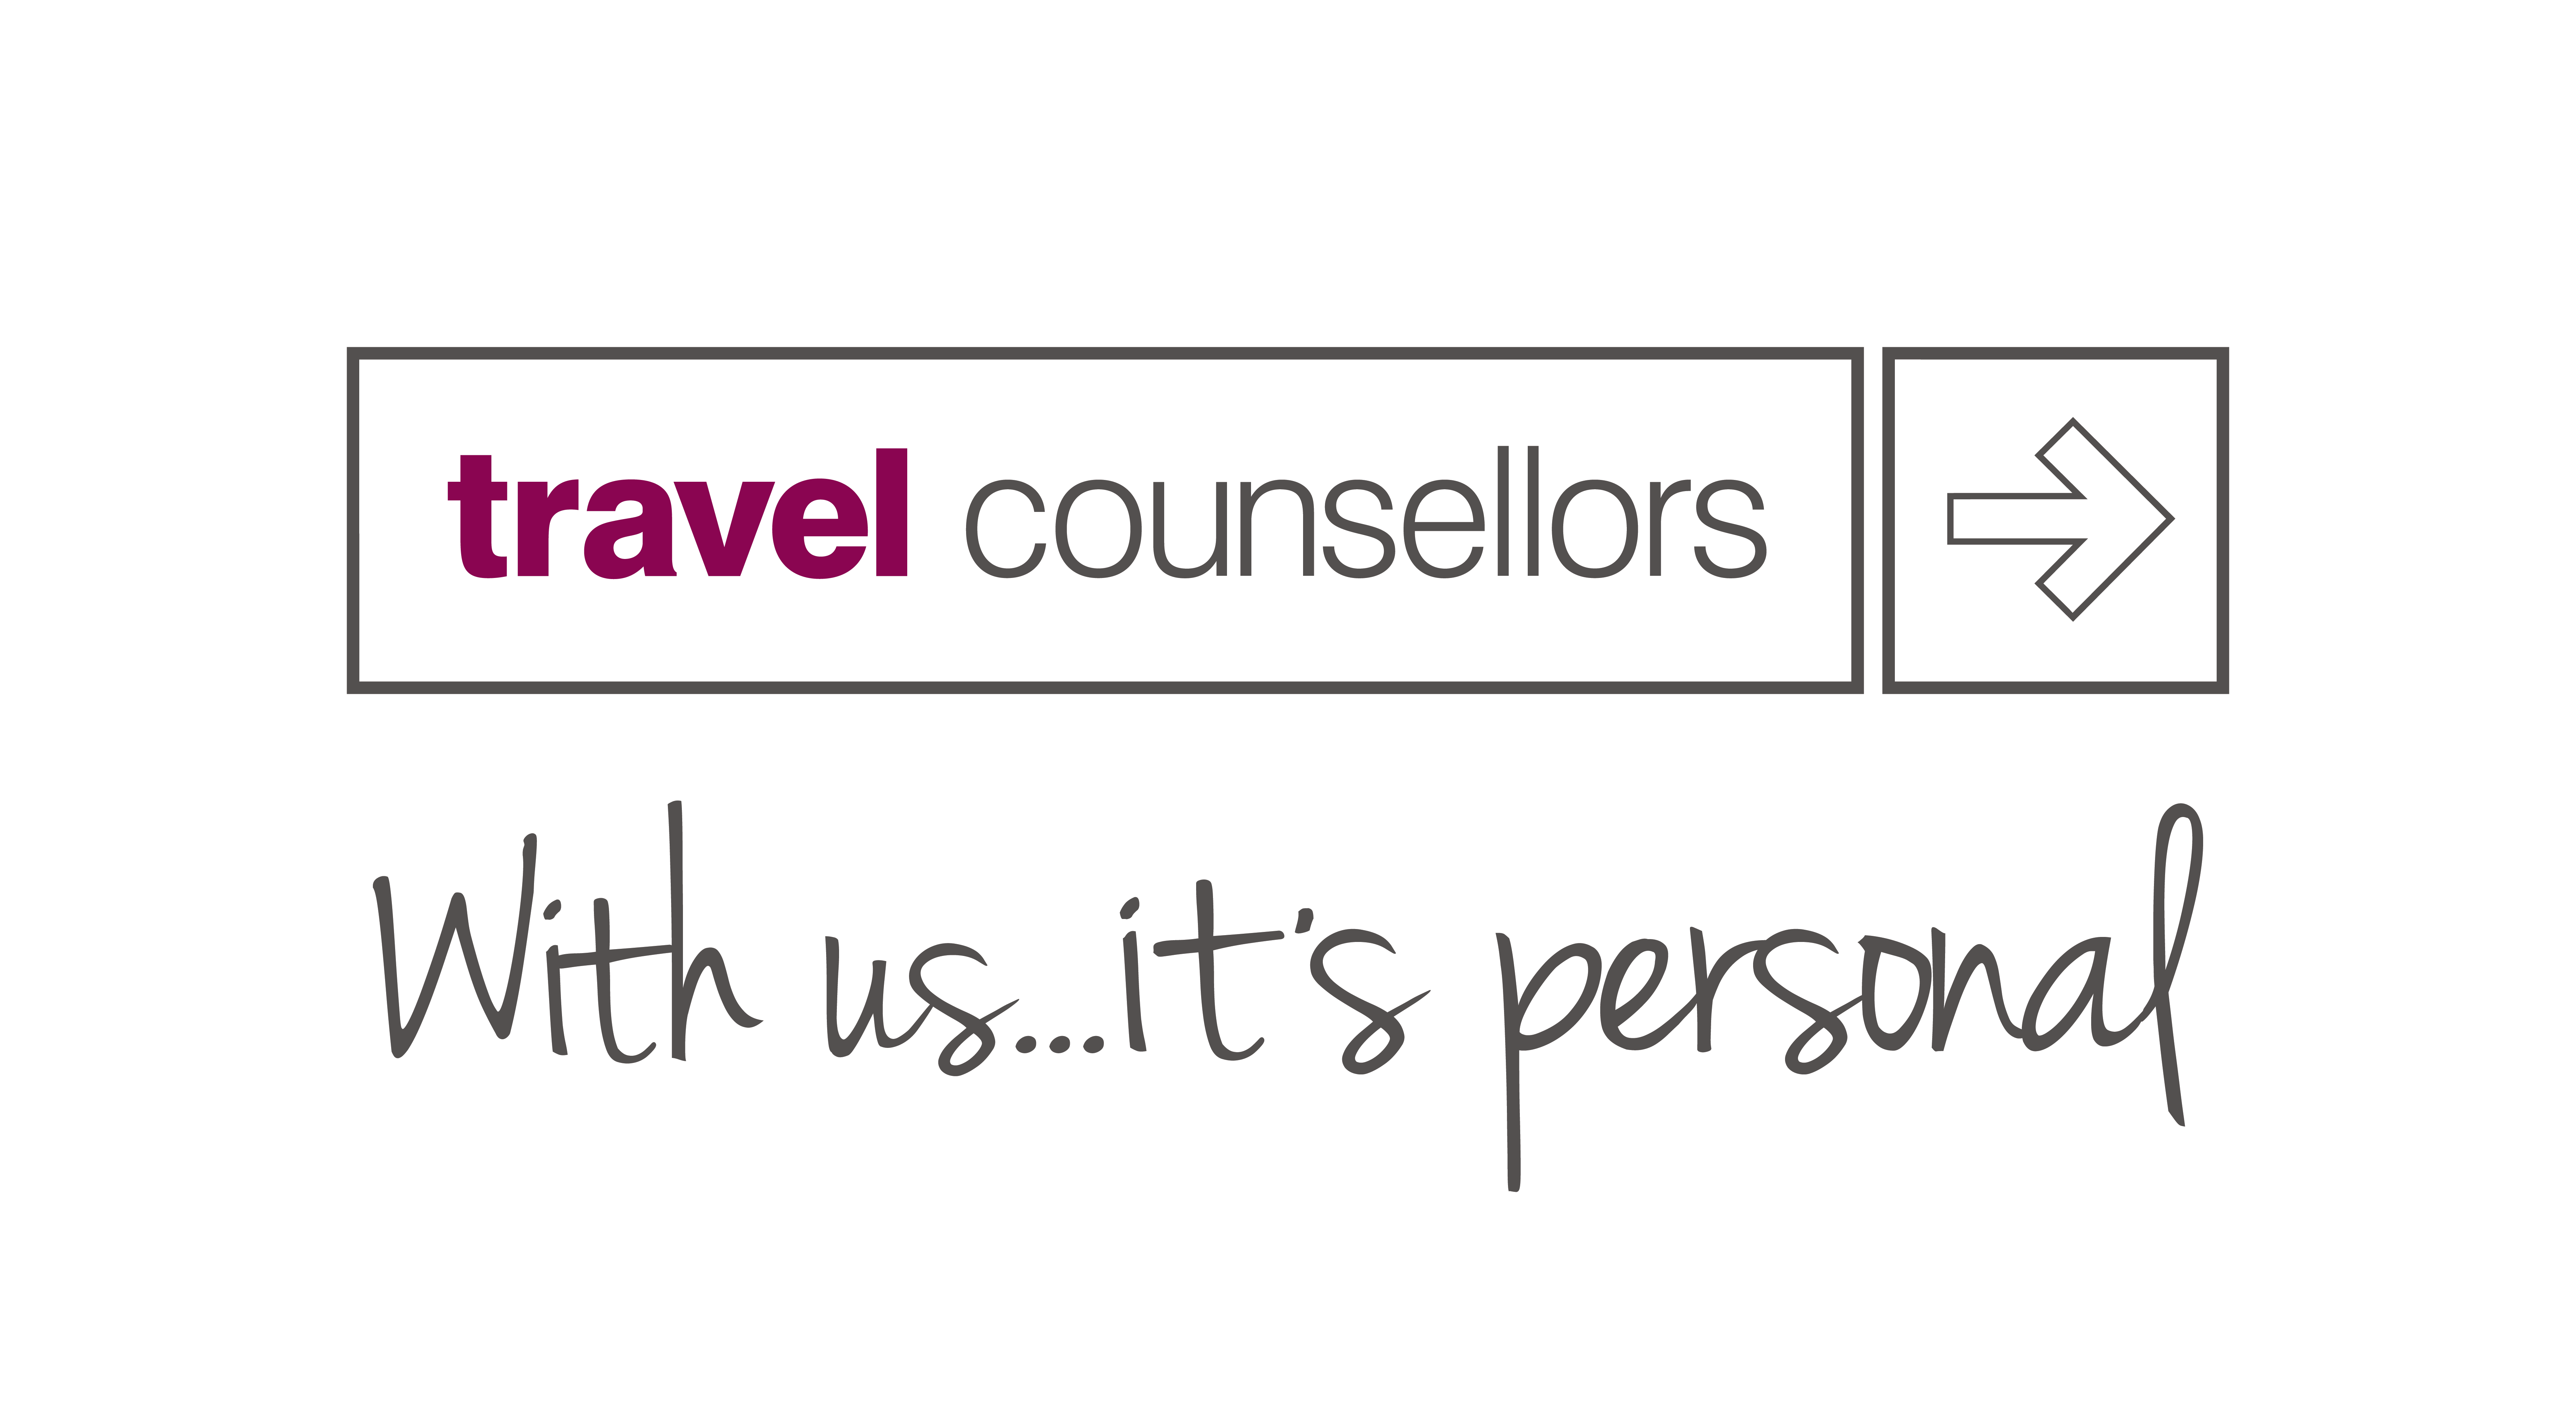 travel counsellors contact details